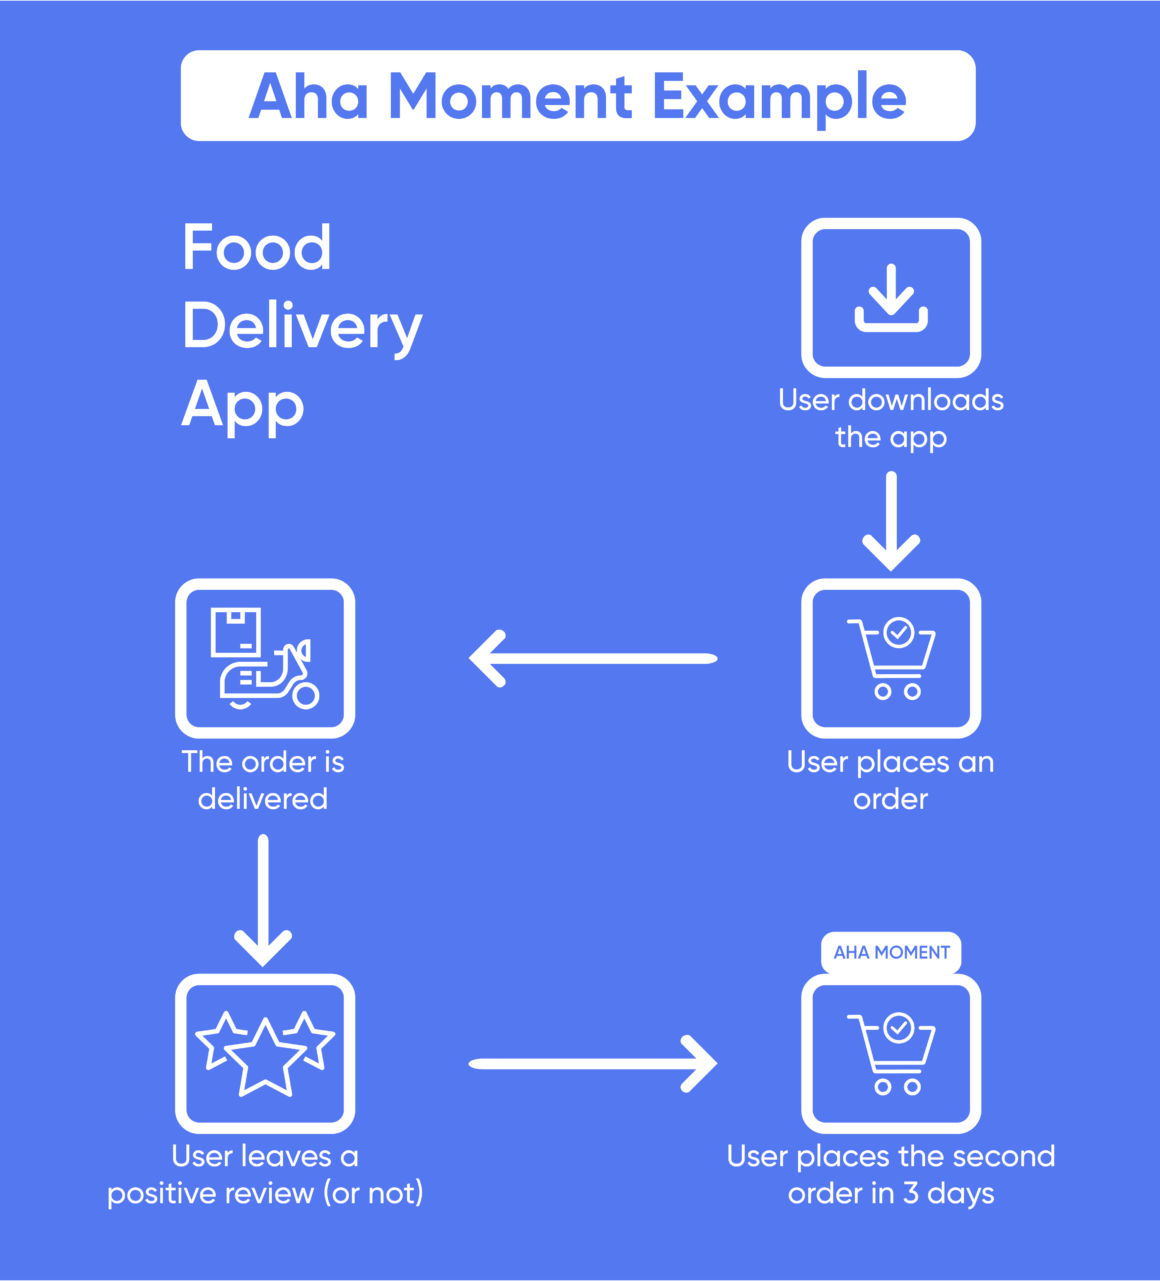 aha moment example food delivery app